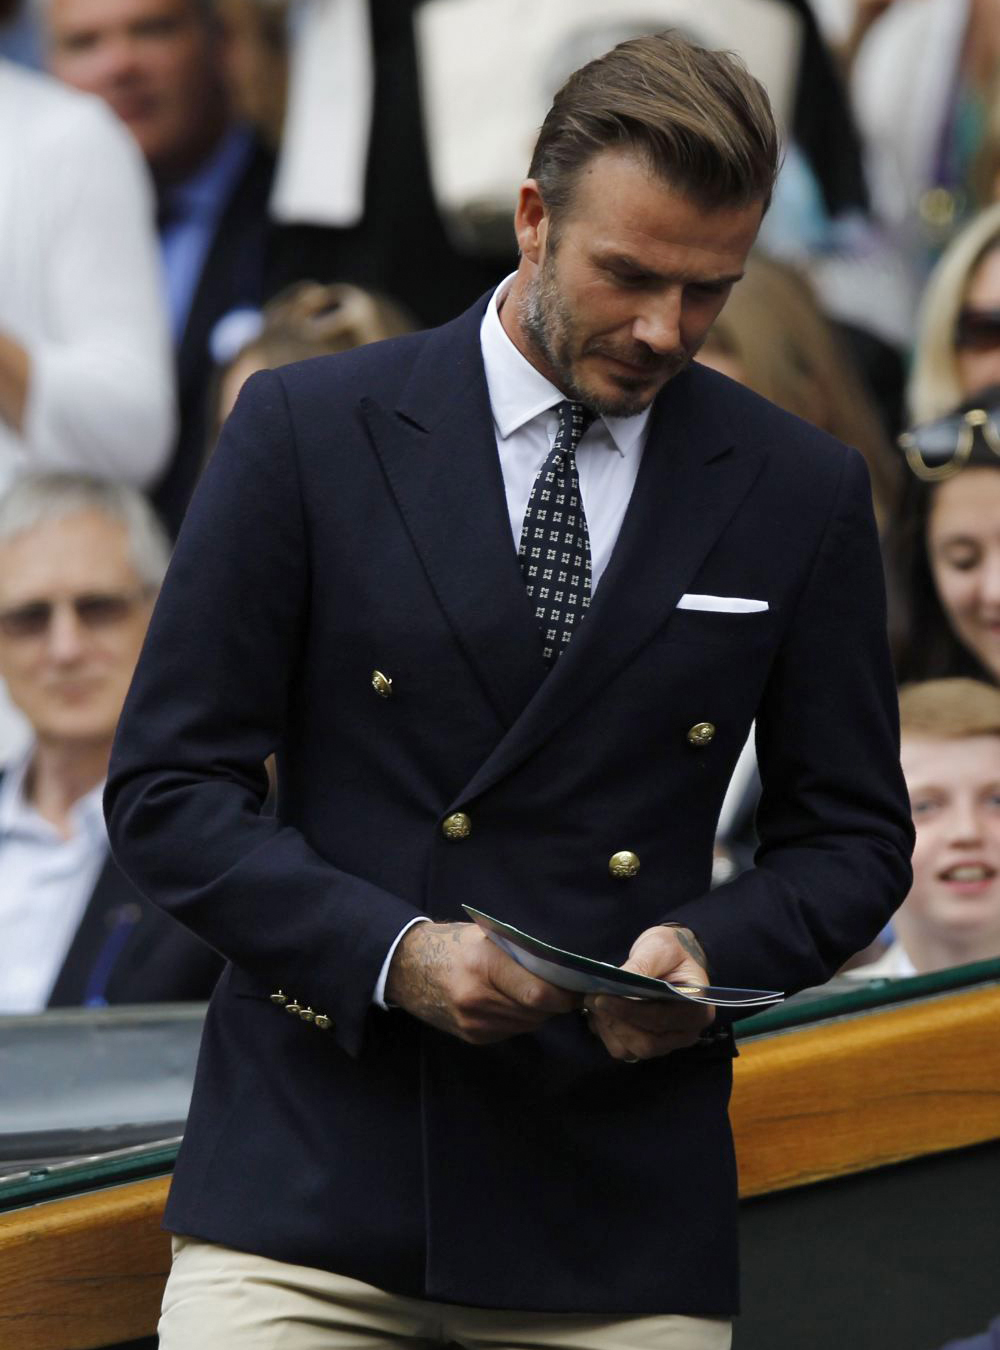 David Beckham Suit Style Guide